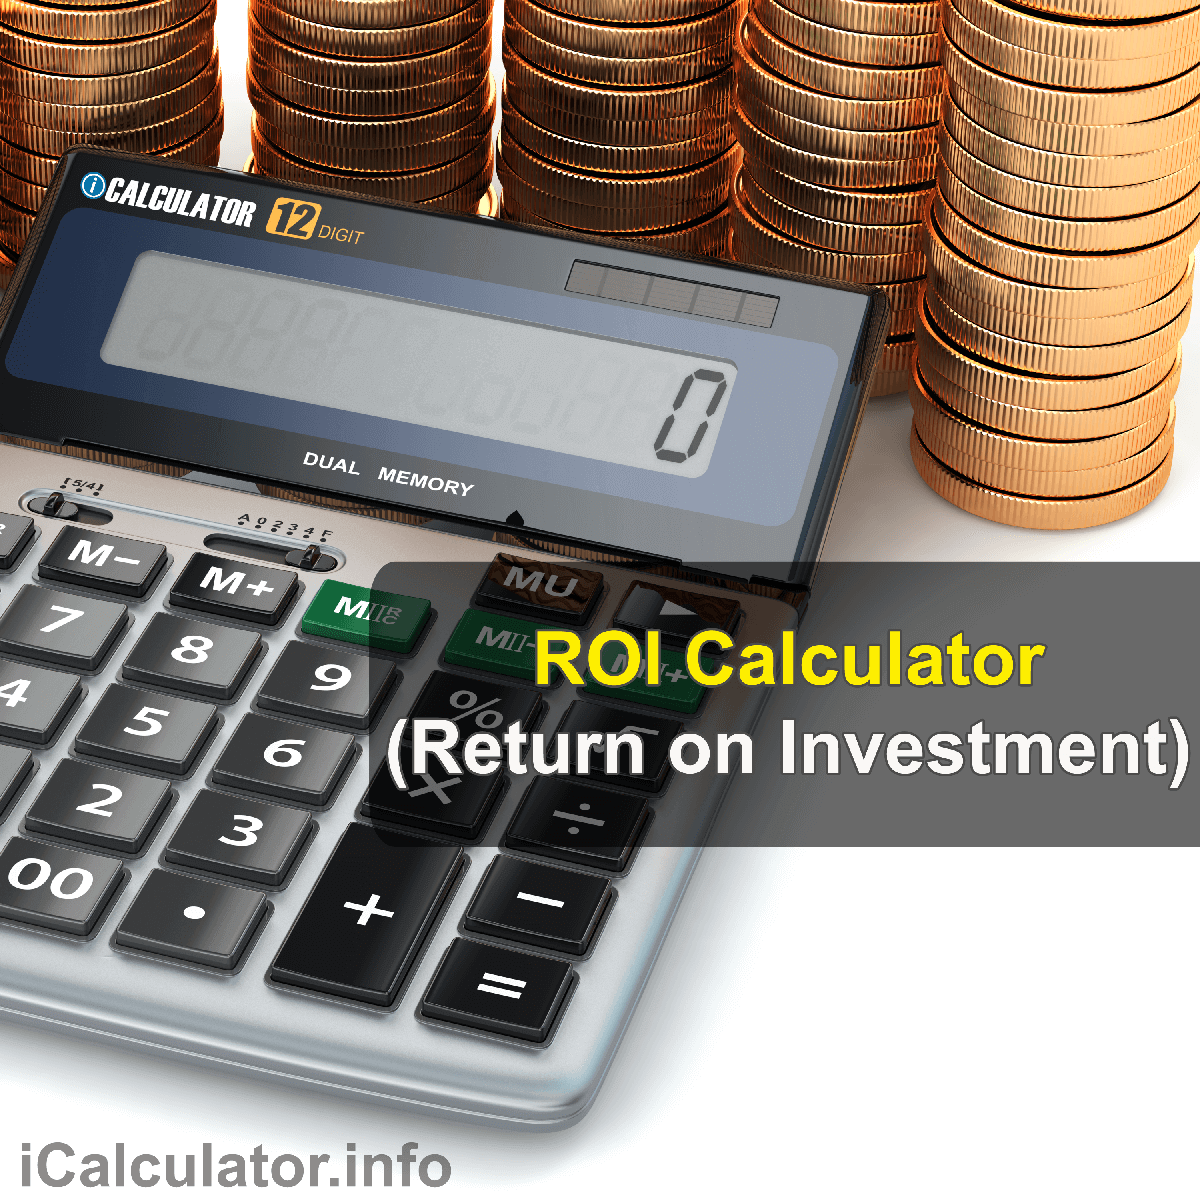 ROI Calculator. This image shows the an accountant manually calculating the return on investment formula. The return on investment formula is used by the ROI Calculator to calculate the ROI percentage and ROI Ratio to support investment decision making.